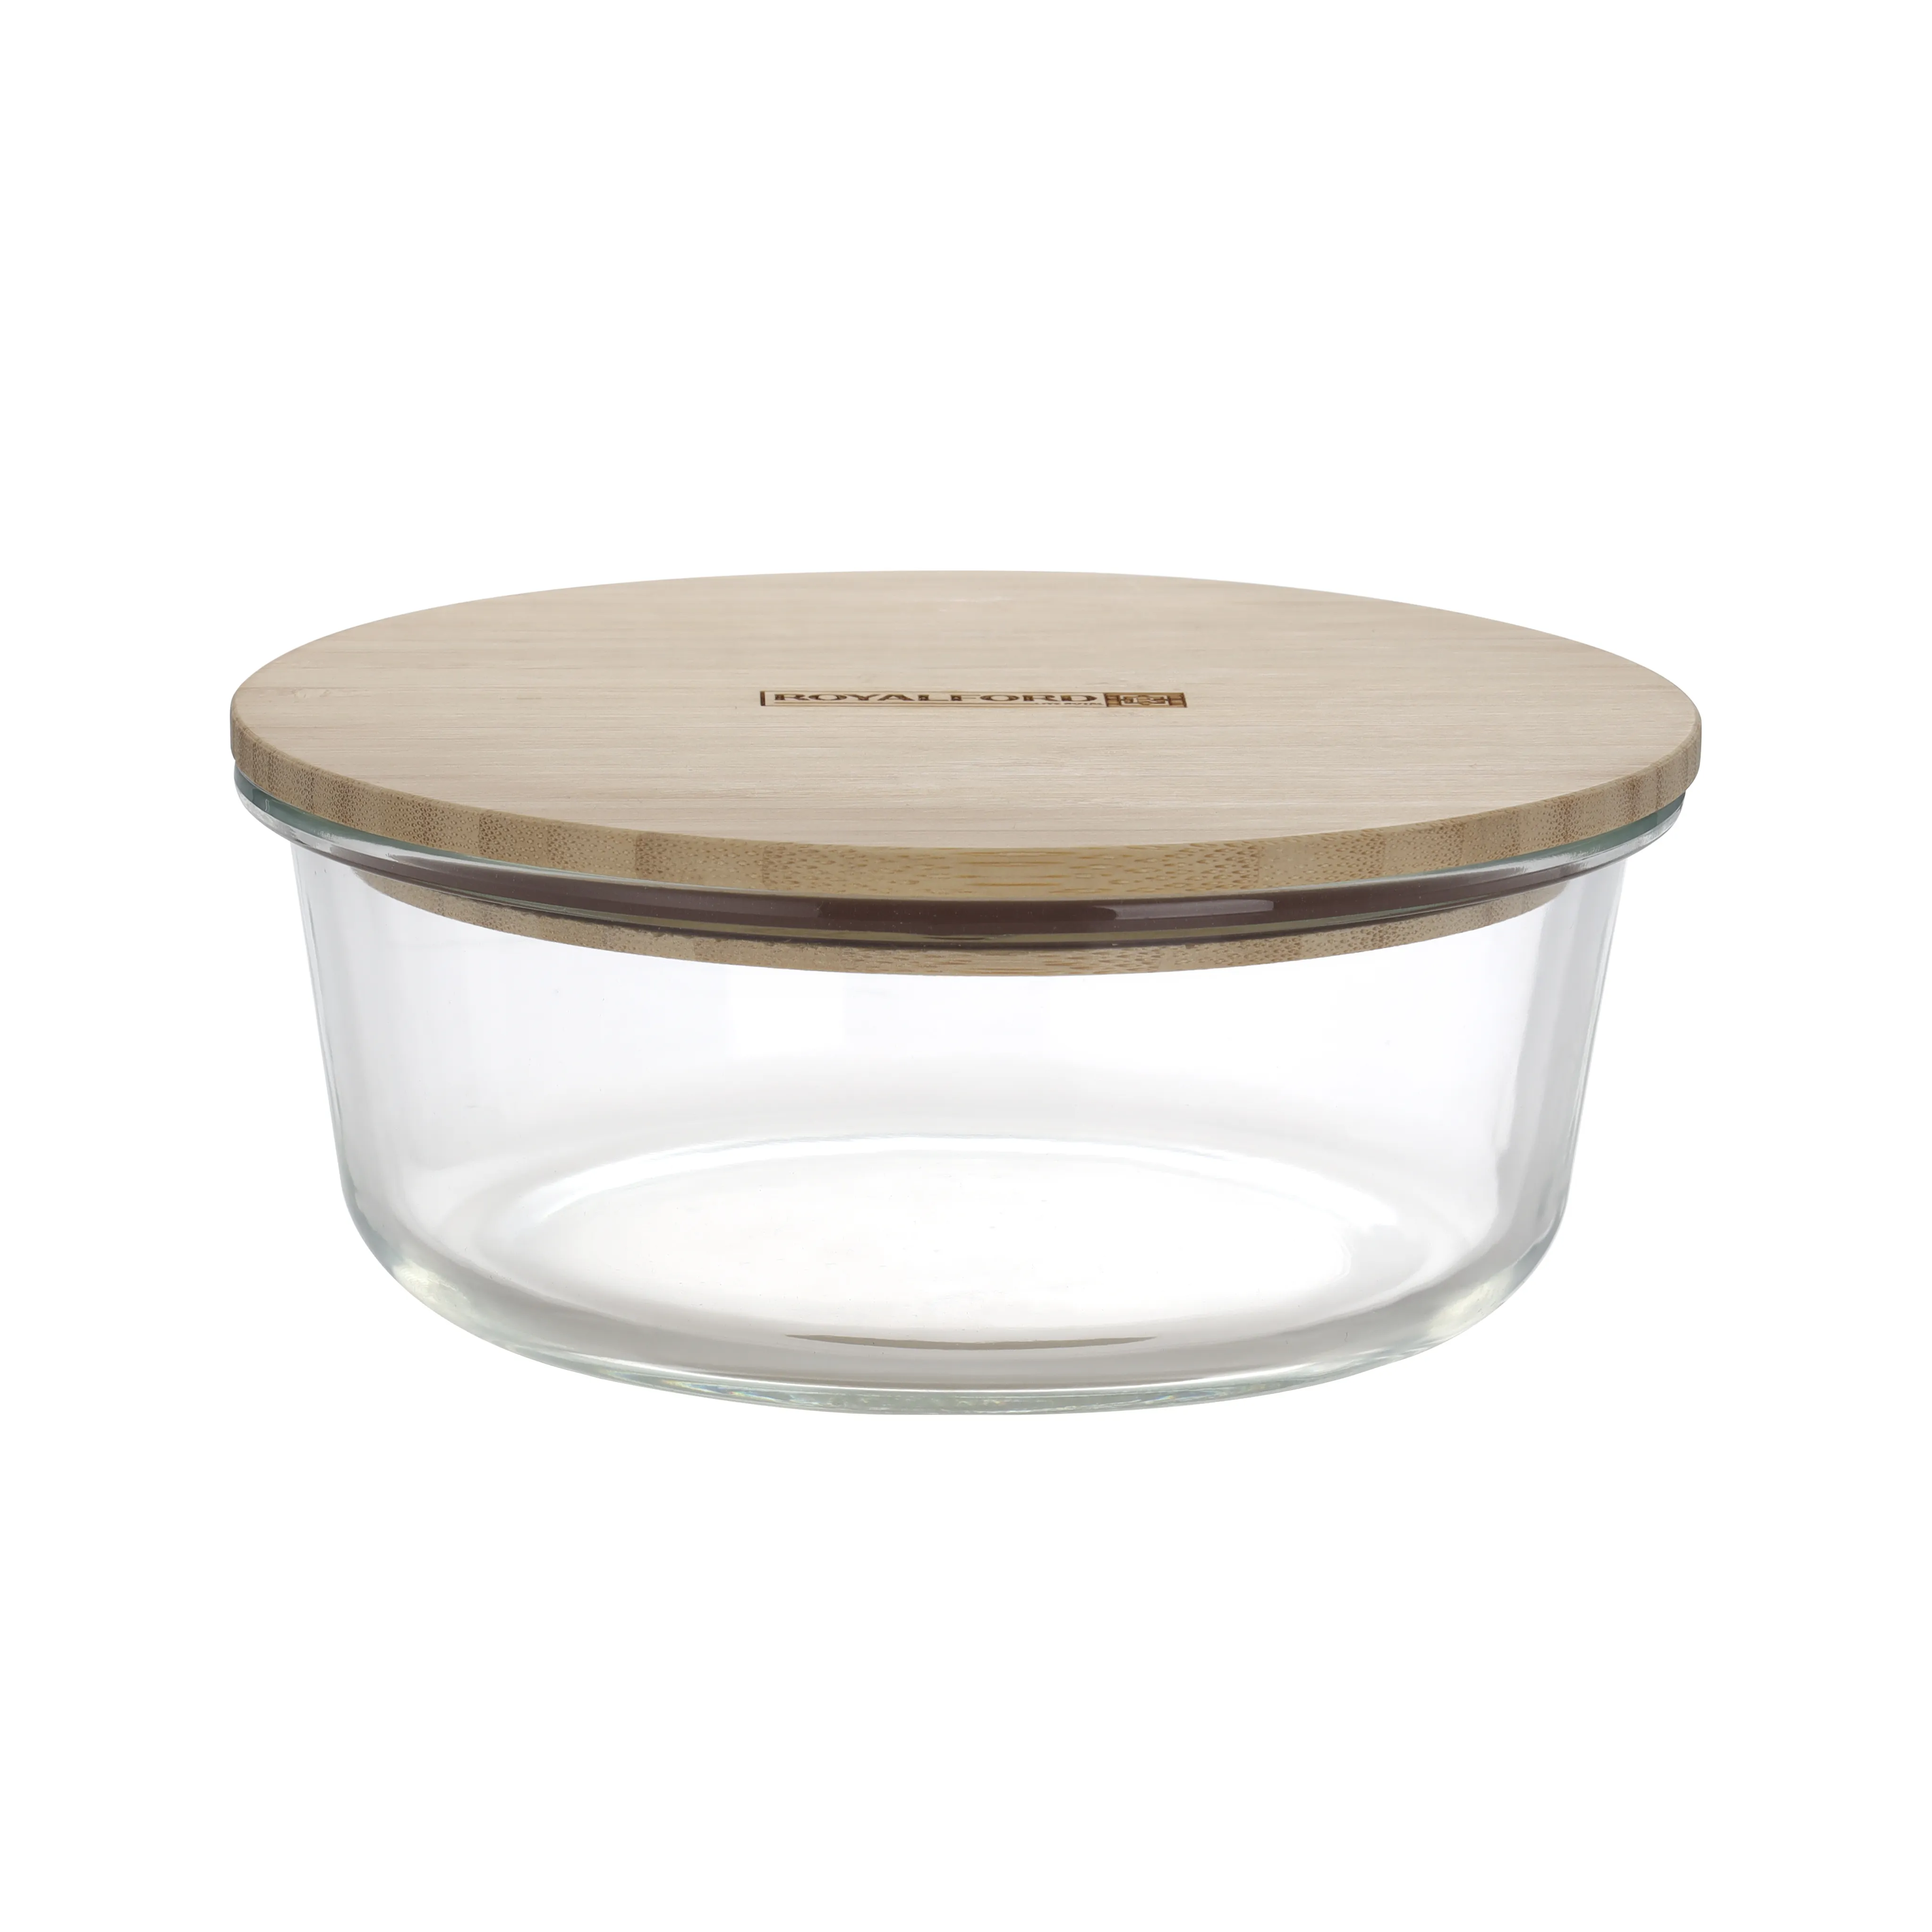 Royalford Round Glass Food Container with Bamboo Lid, RF10324 - Freezer & Dishwasher Safe, Air Tight Lid with Silicone Sealing Ring, Portable, Eco-Friendly